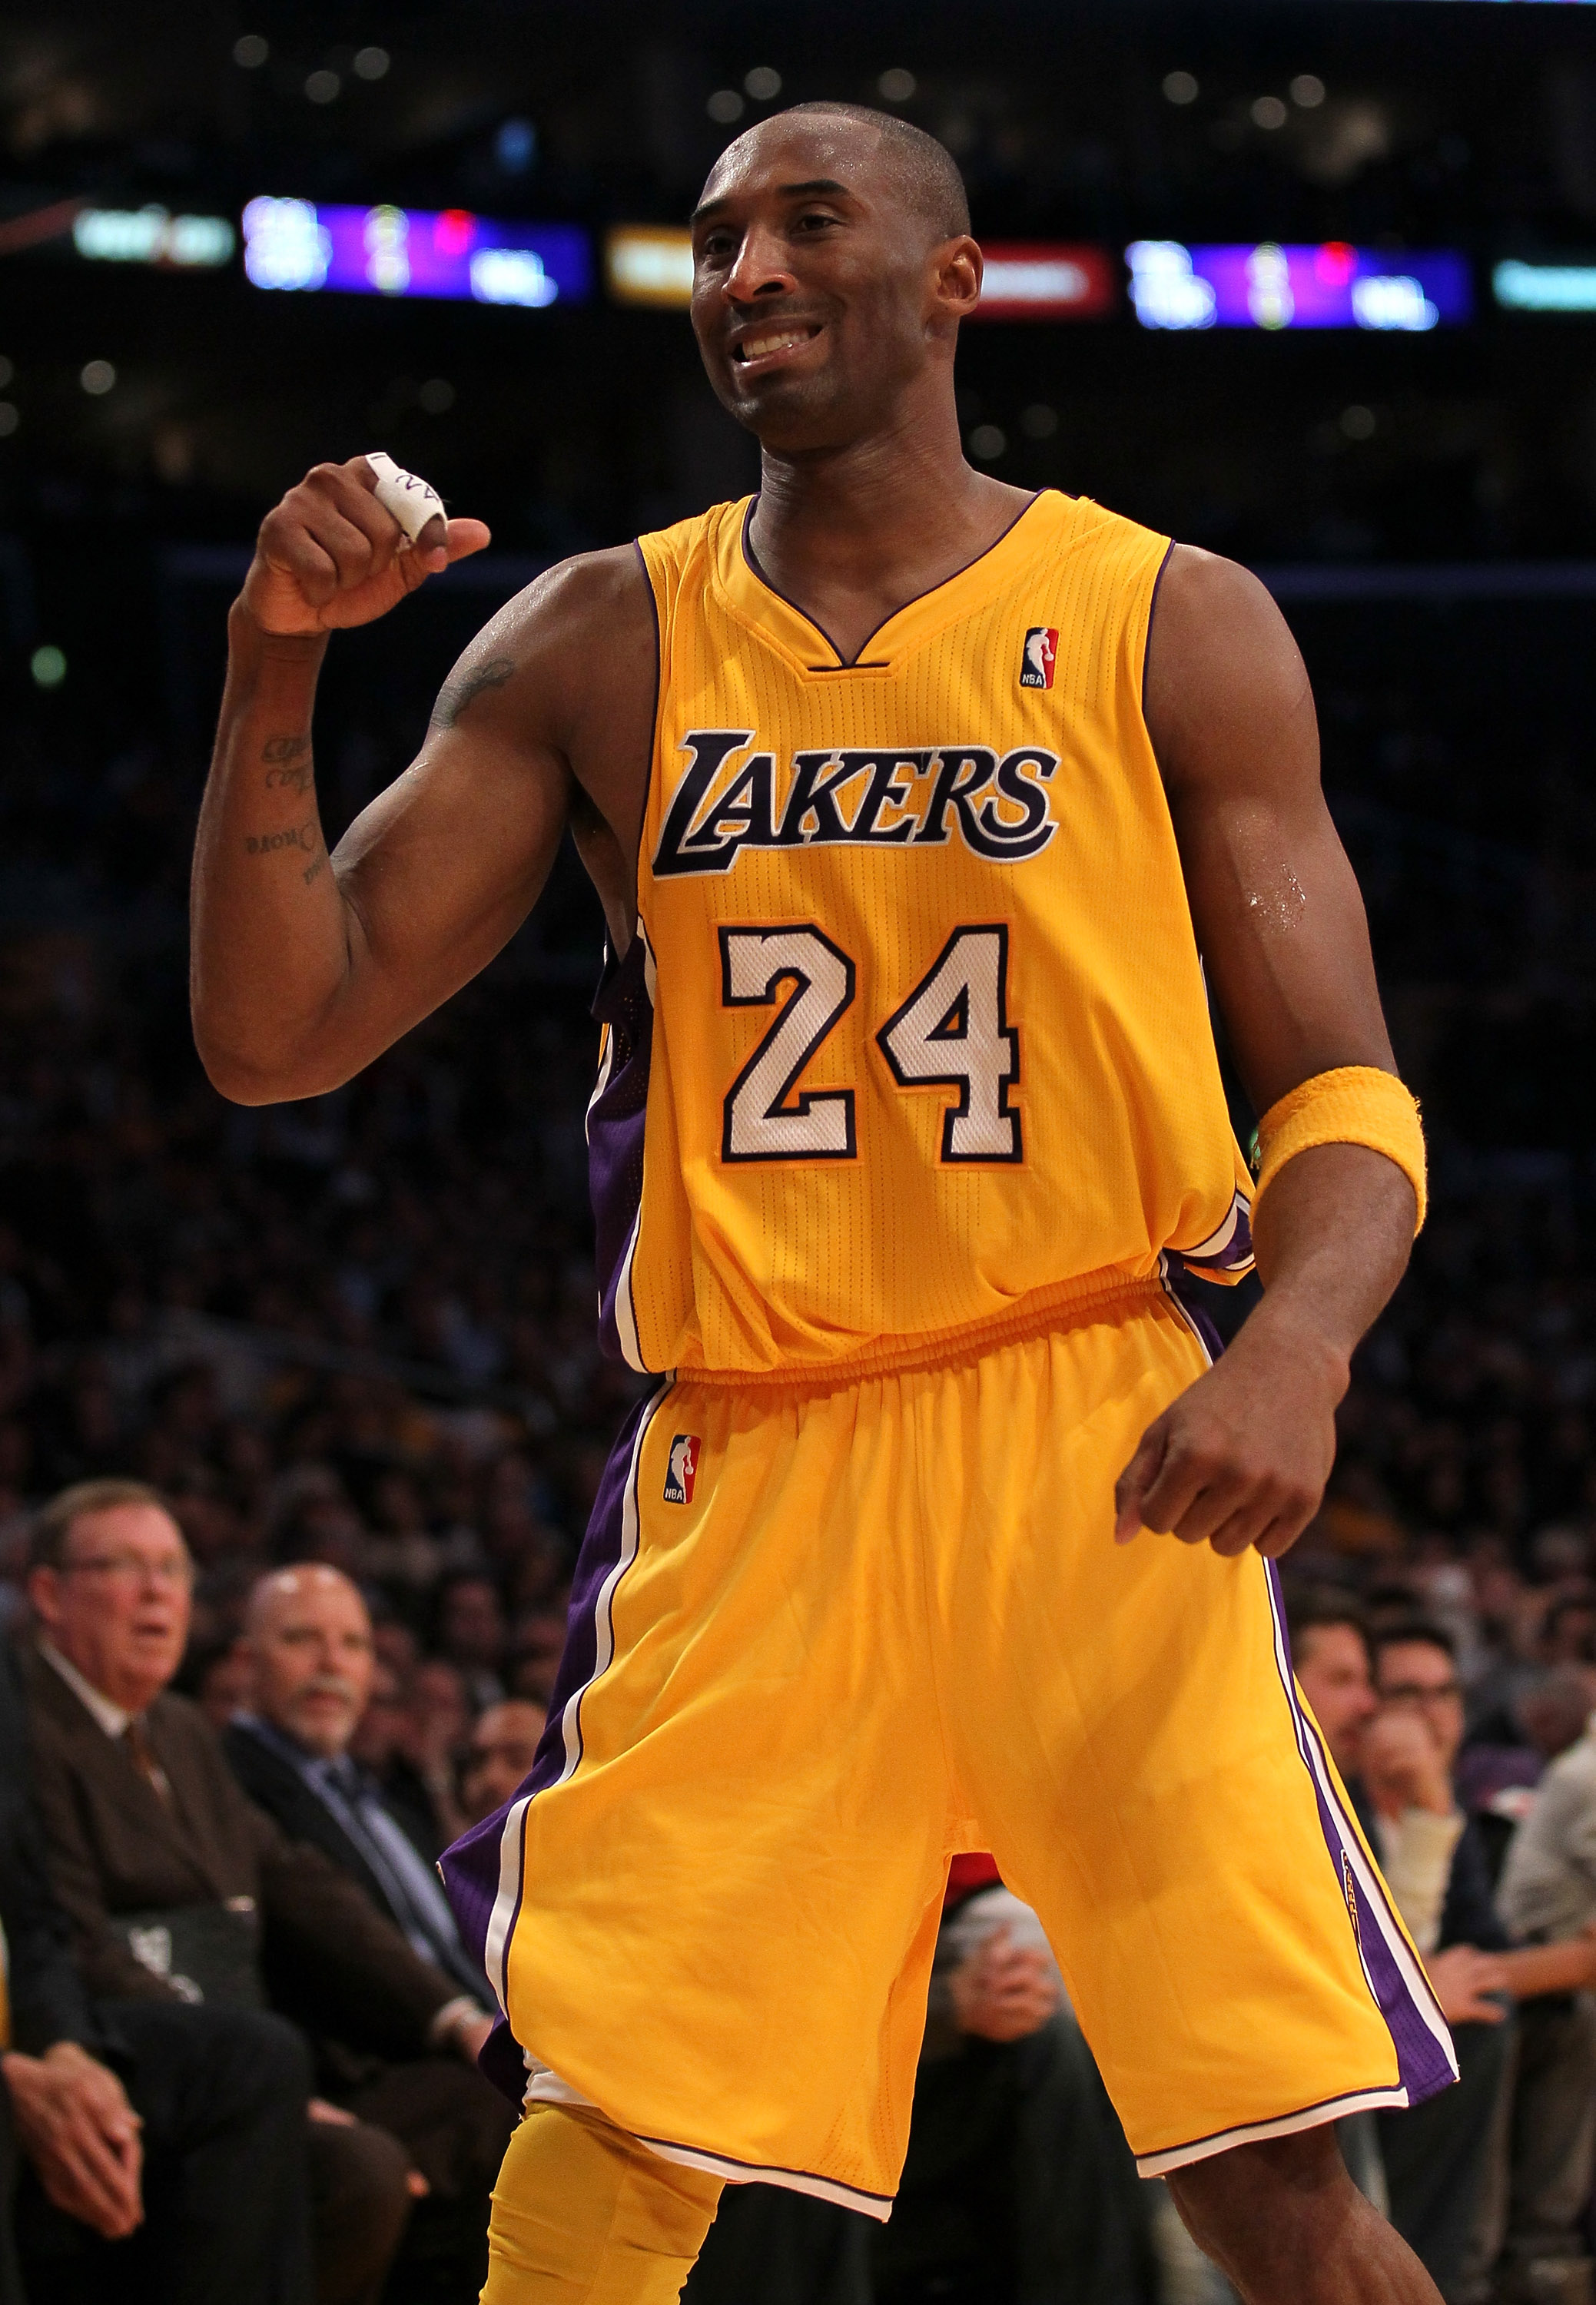 Kobe Bryant: Is He Still the Best Shooting Guard in the NBA? | Bleacher Report ...